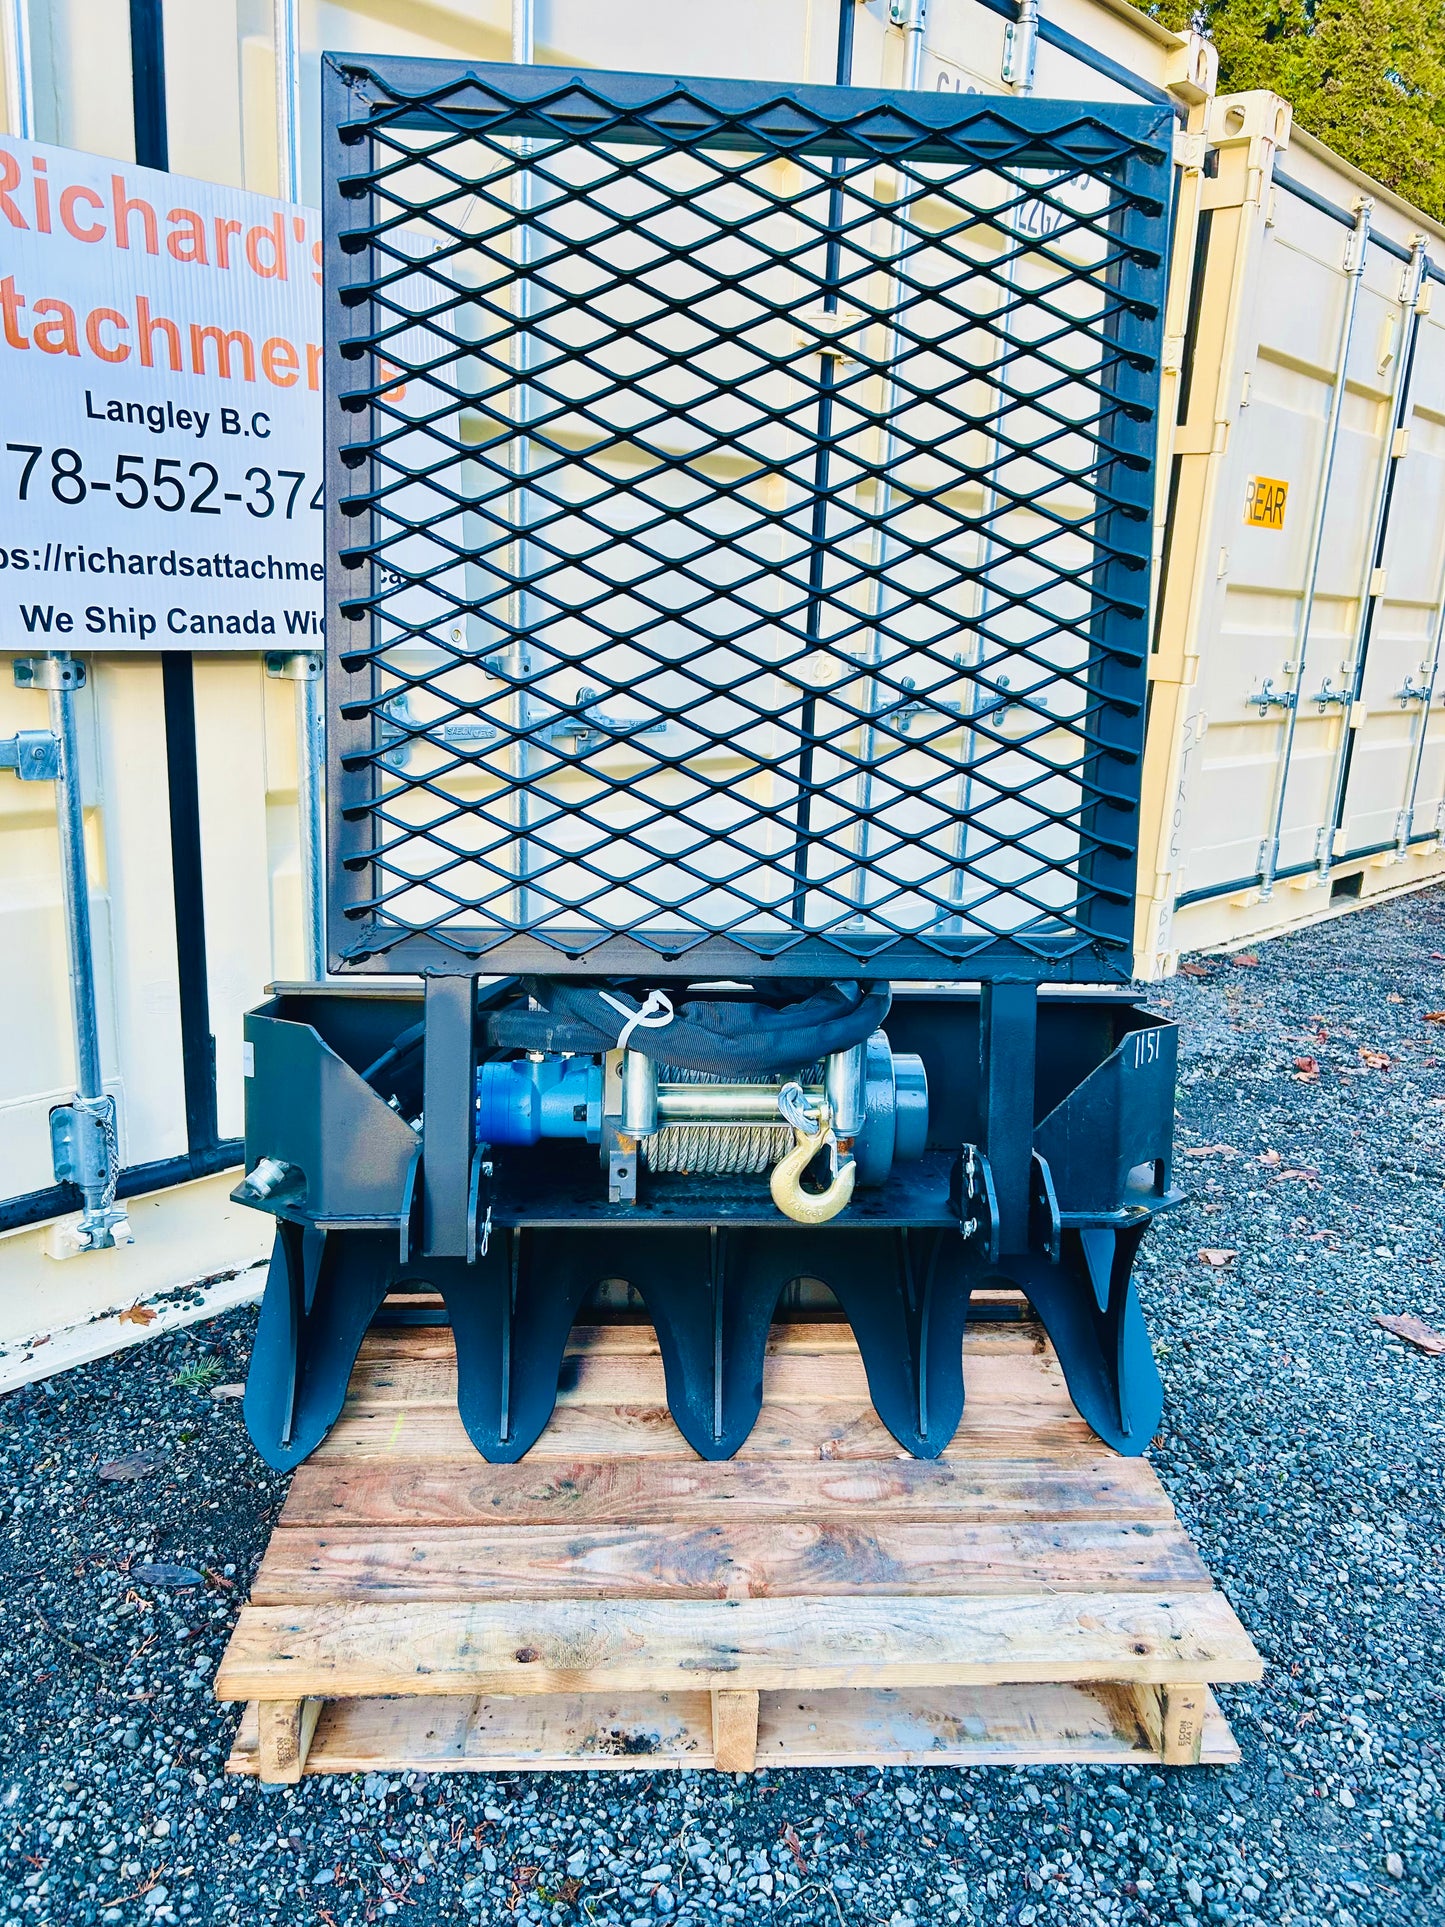 New 3 Ton Skid Steer Forestry Winch